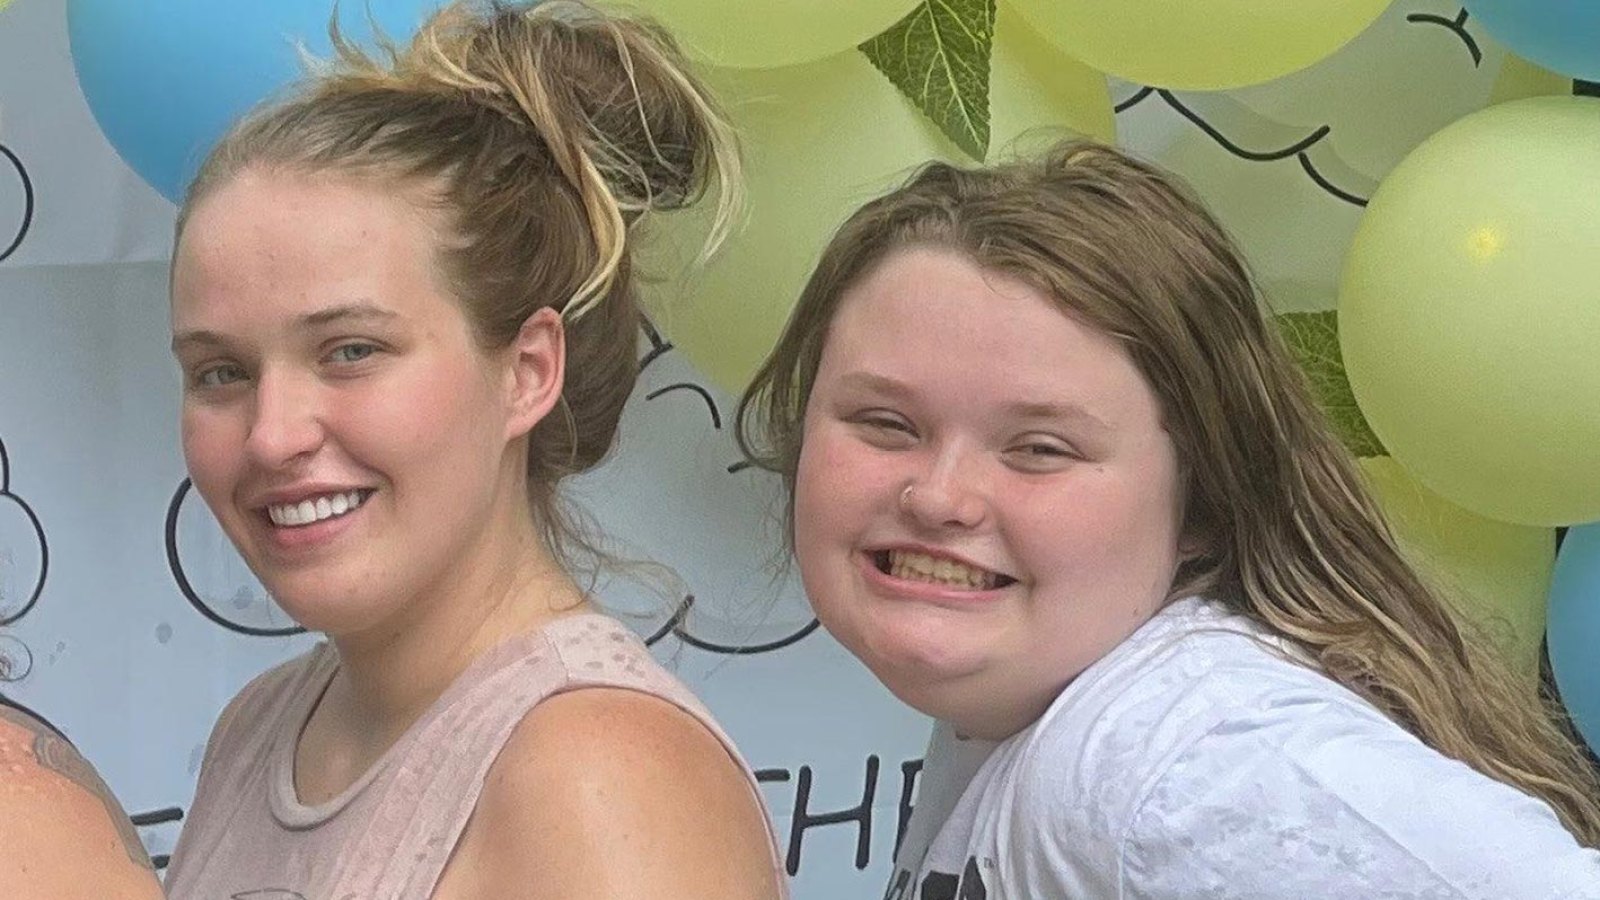 Alana Honey Boo Boo Thompson Mourns Late Sister Anna Cardwell My Heart Is Completely Broken